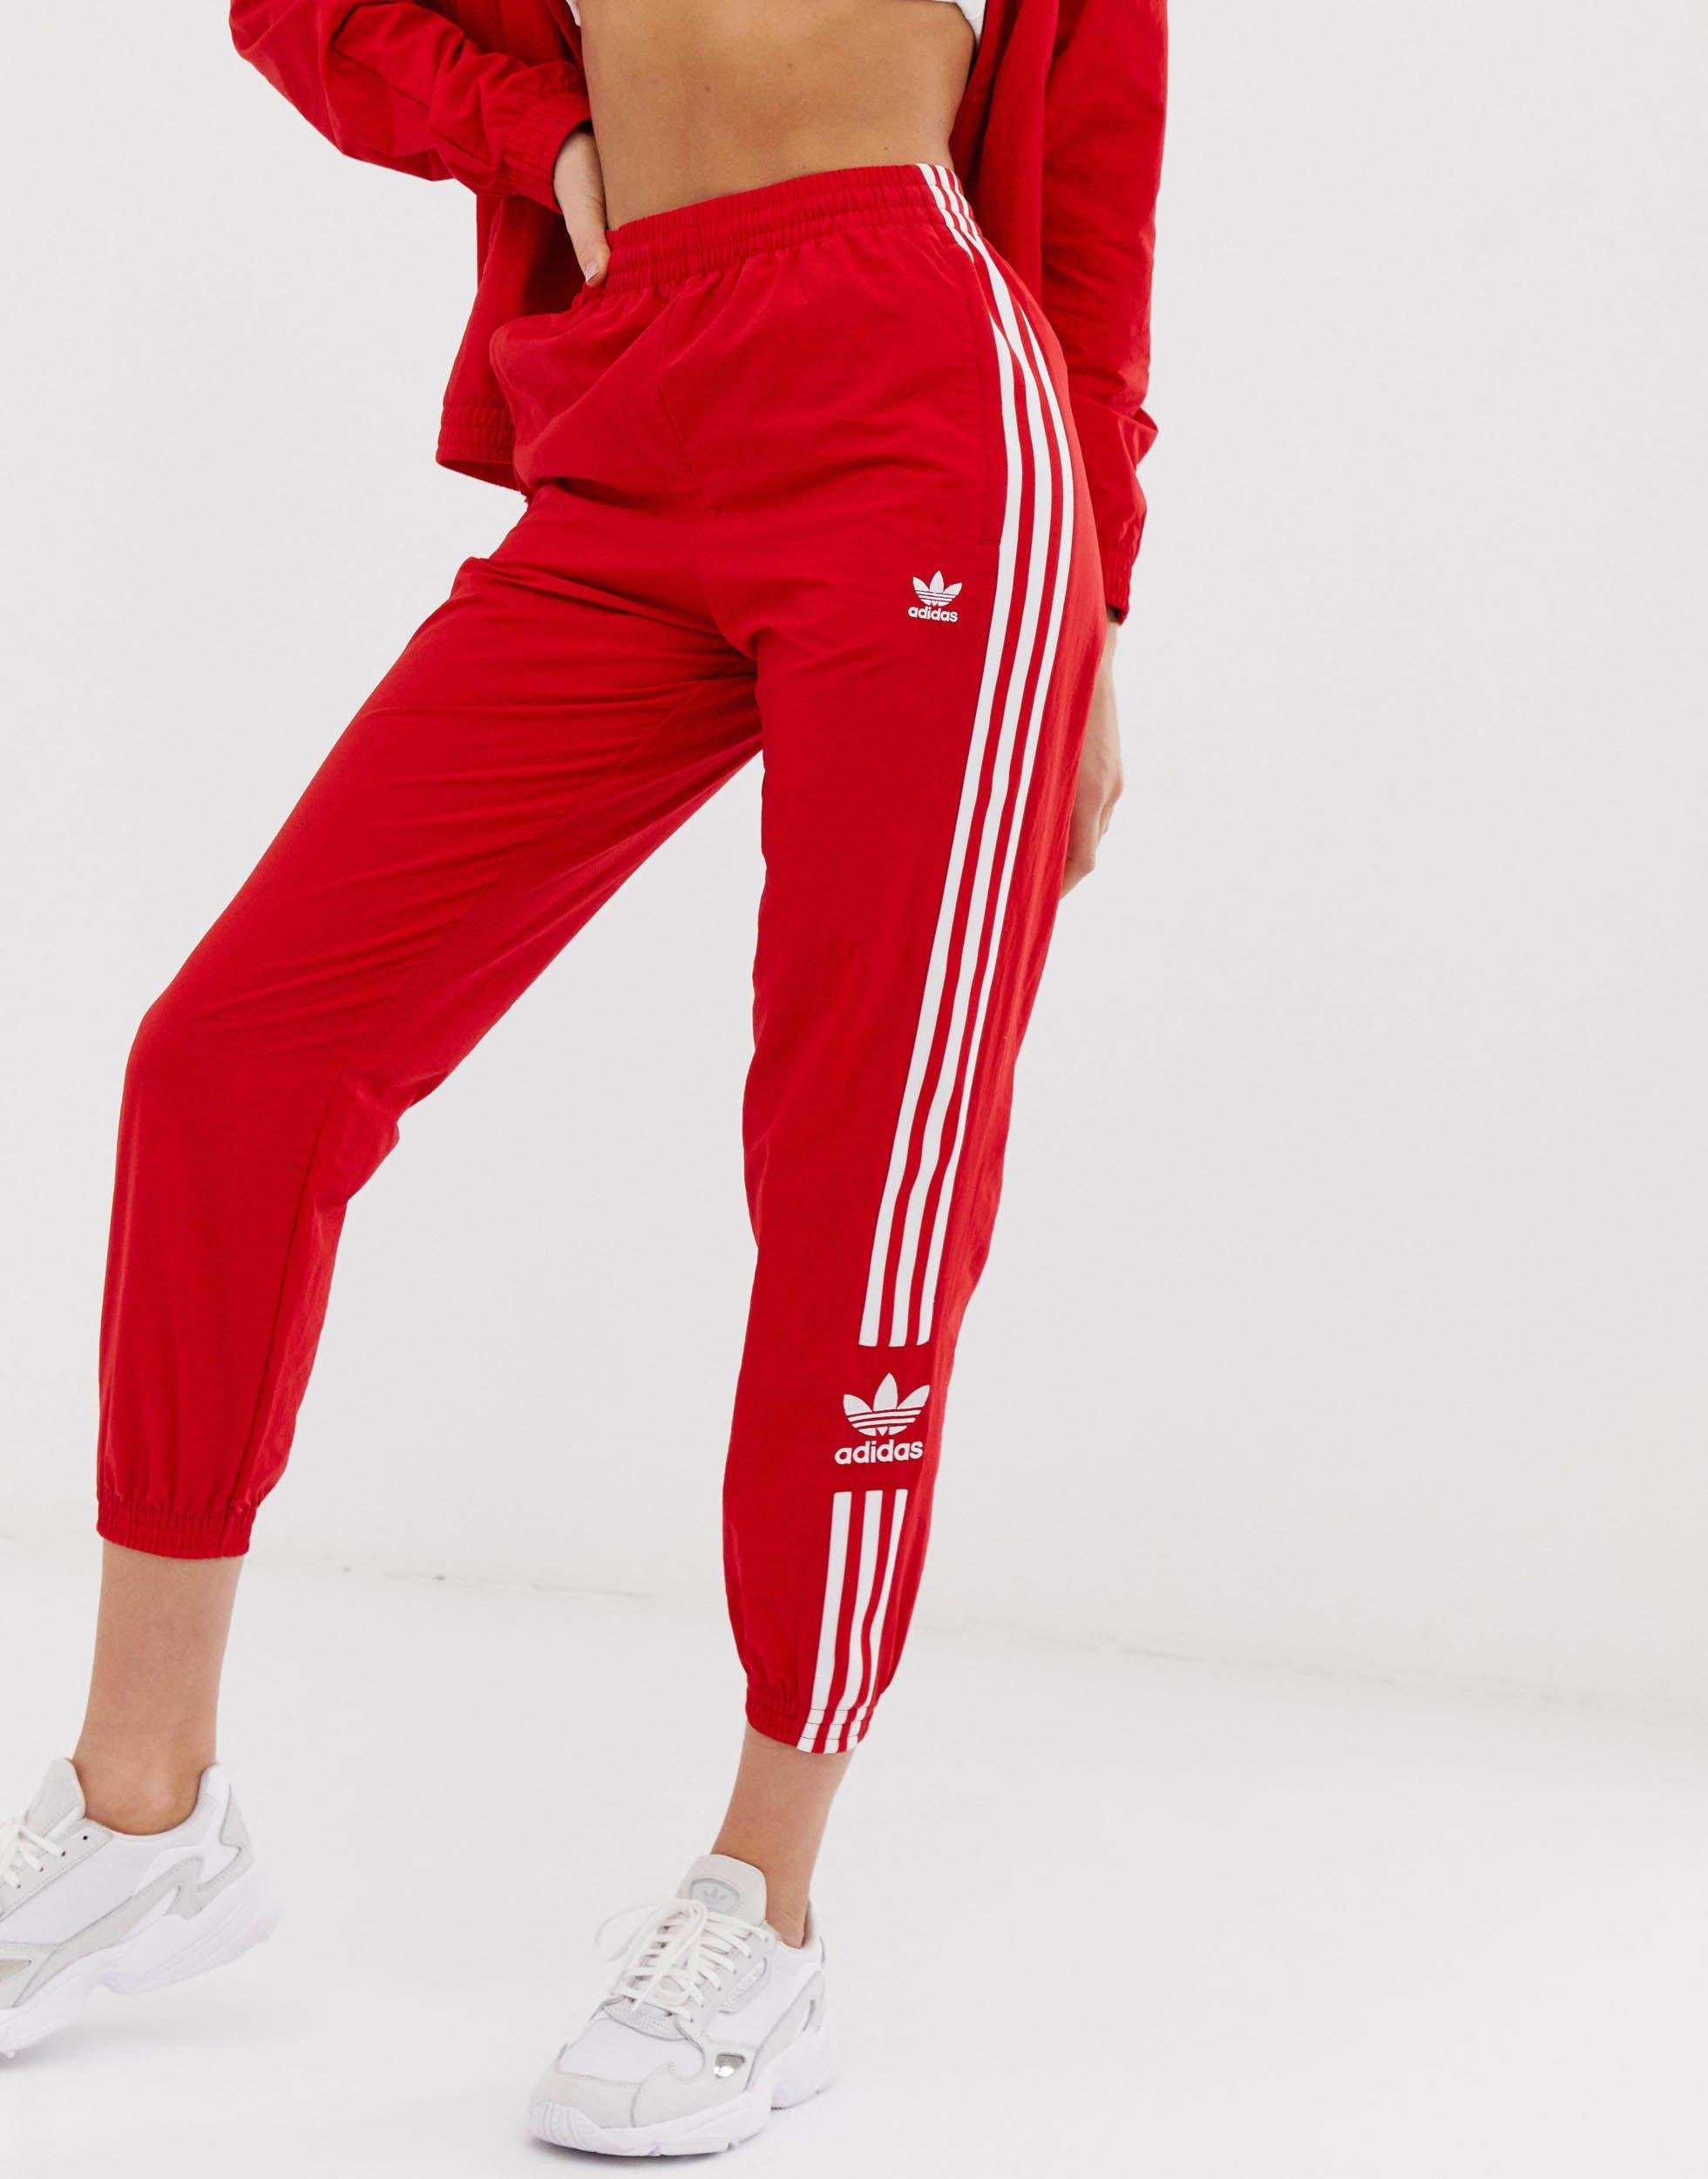 Adidas Originals Red Pants Online Shop, UP TO 63% OFF | www.apmusicales.com